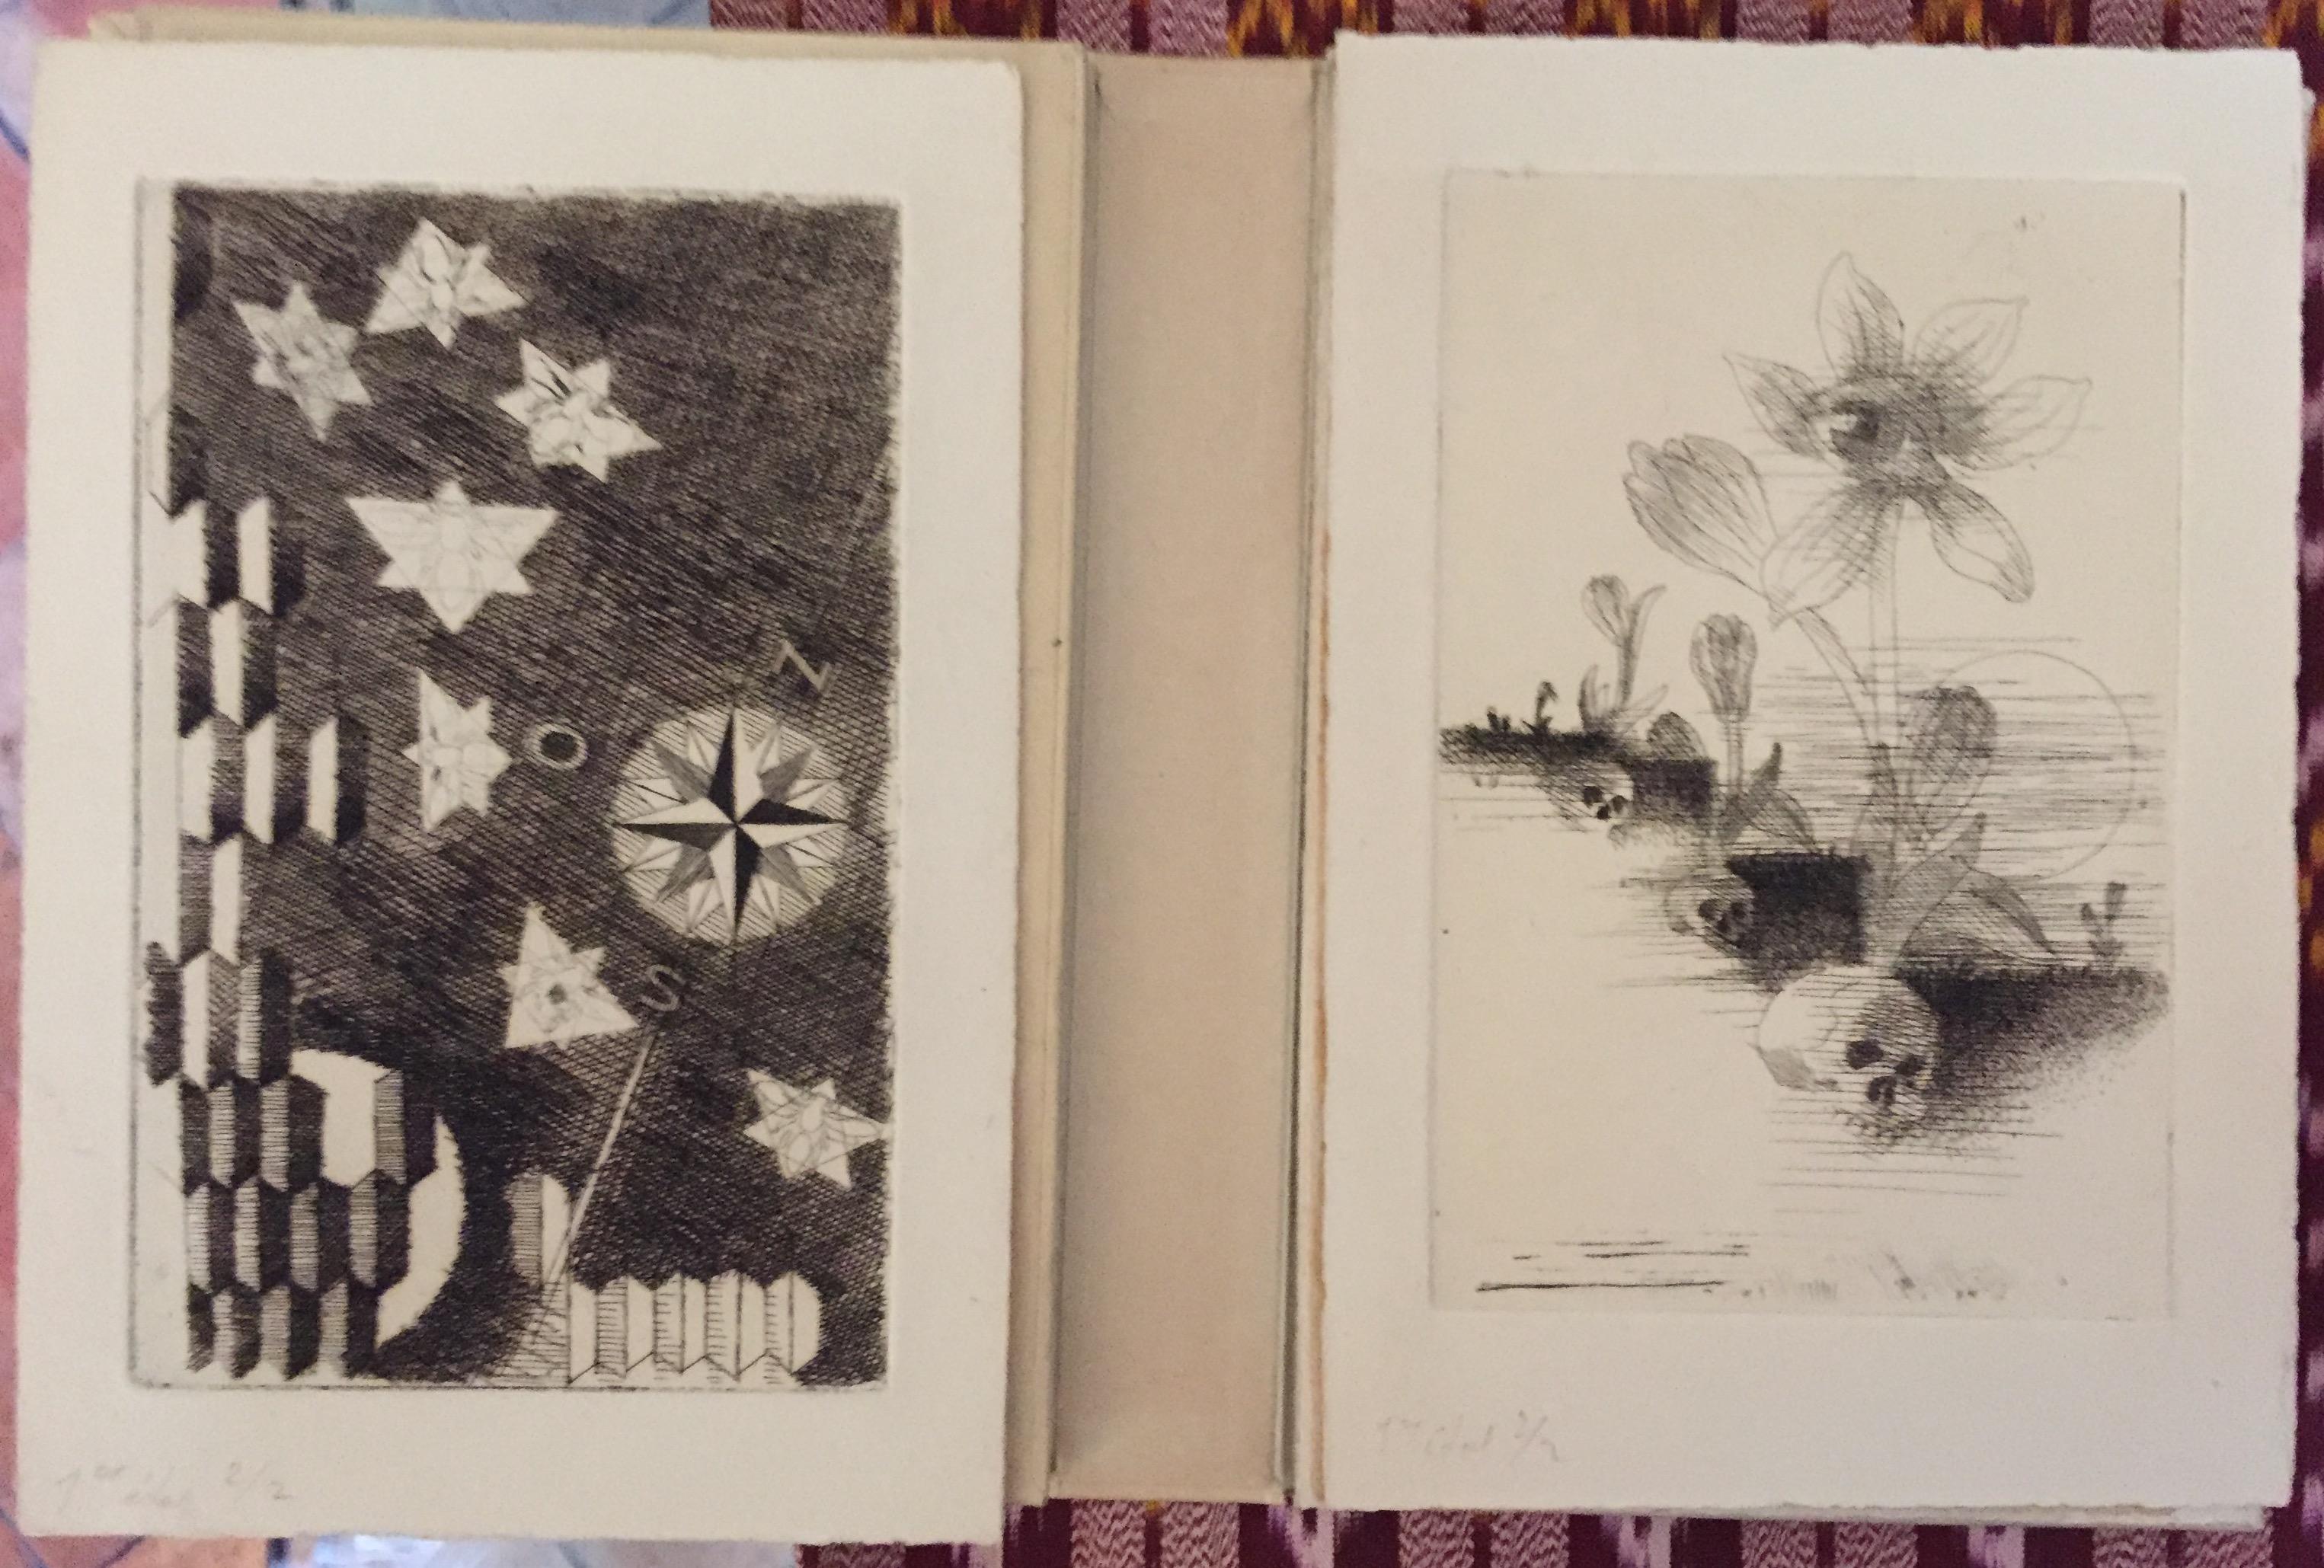 Deluxe edition of only 23 copies including 40 original etchings by L. Marcoussis, including the title and a portrait of Apollinaire. One of the 20 copies on vélin d'Arches numbered in roman numbers including the etchings before the signature, 2